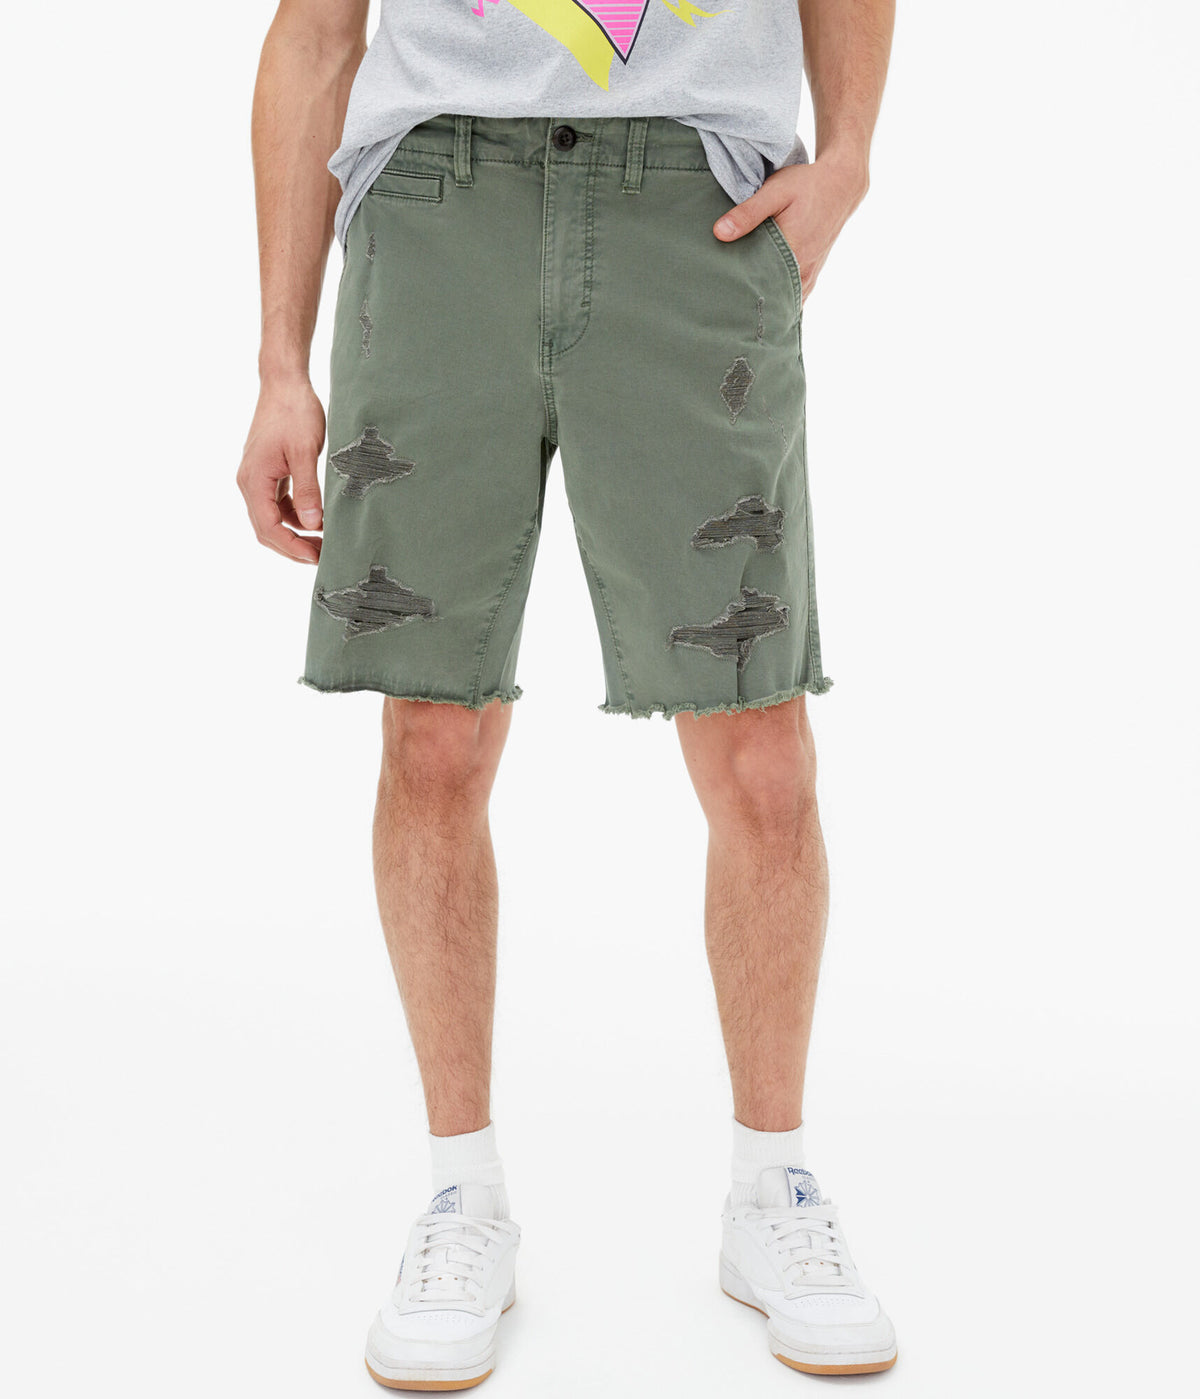 Aeropostale Mens' Worn-In Classic Chino Shorts 9.5" - Green - Size 27 - Cotton - Teen Fashion & Clothing Olive